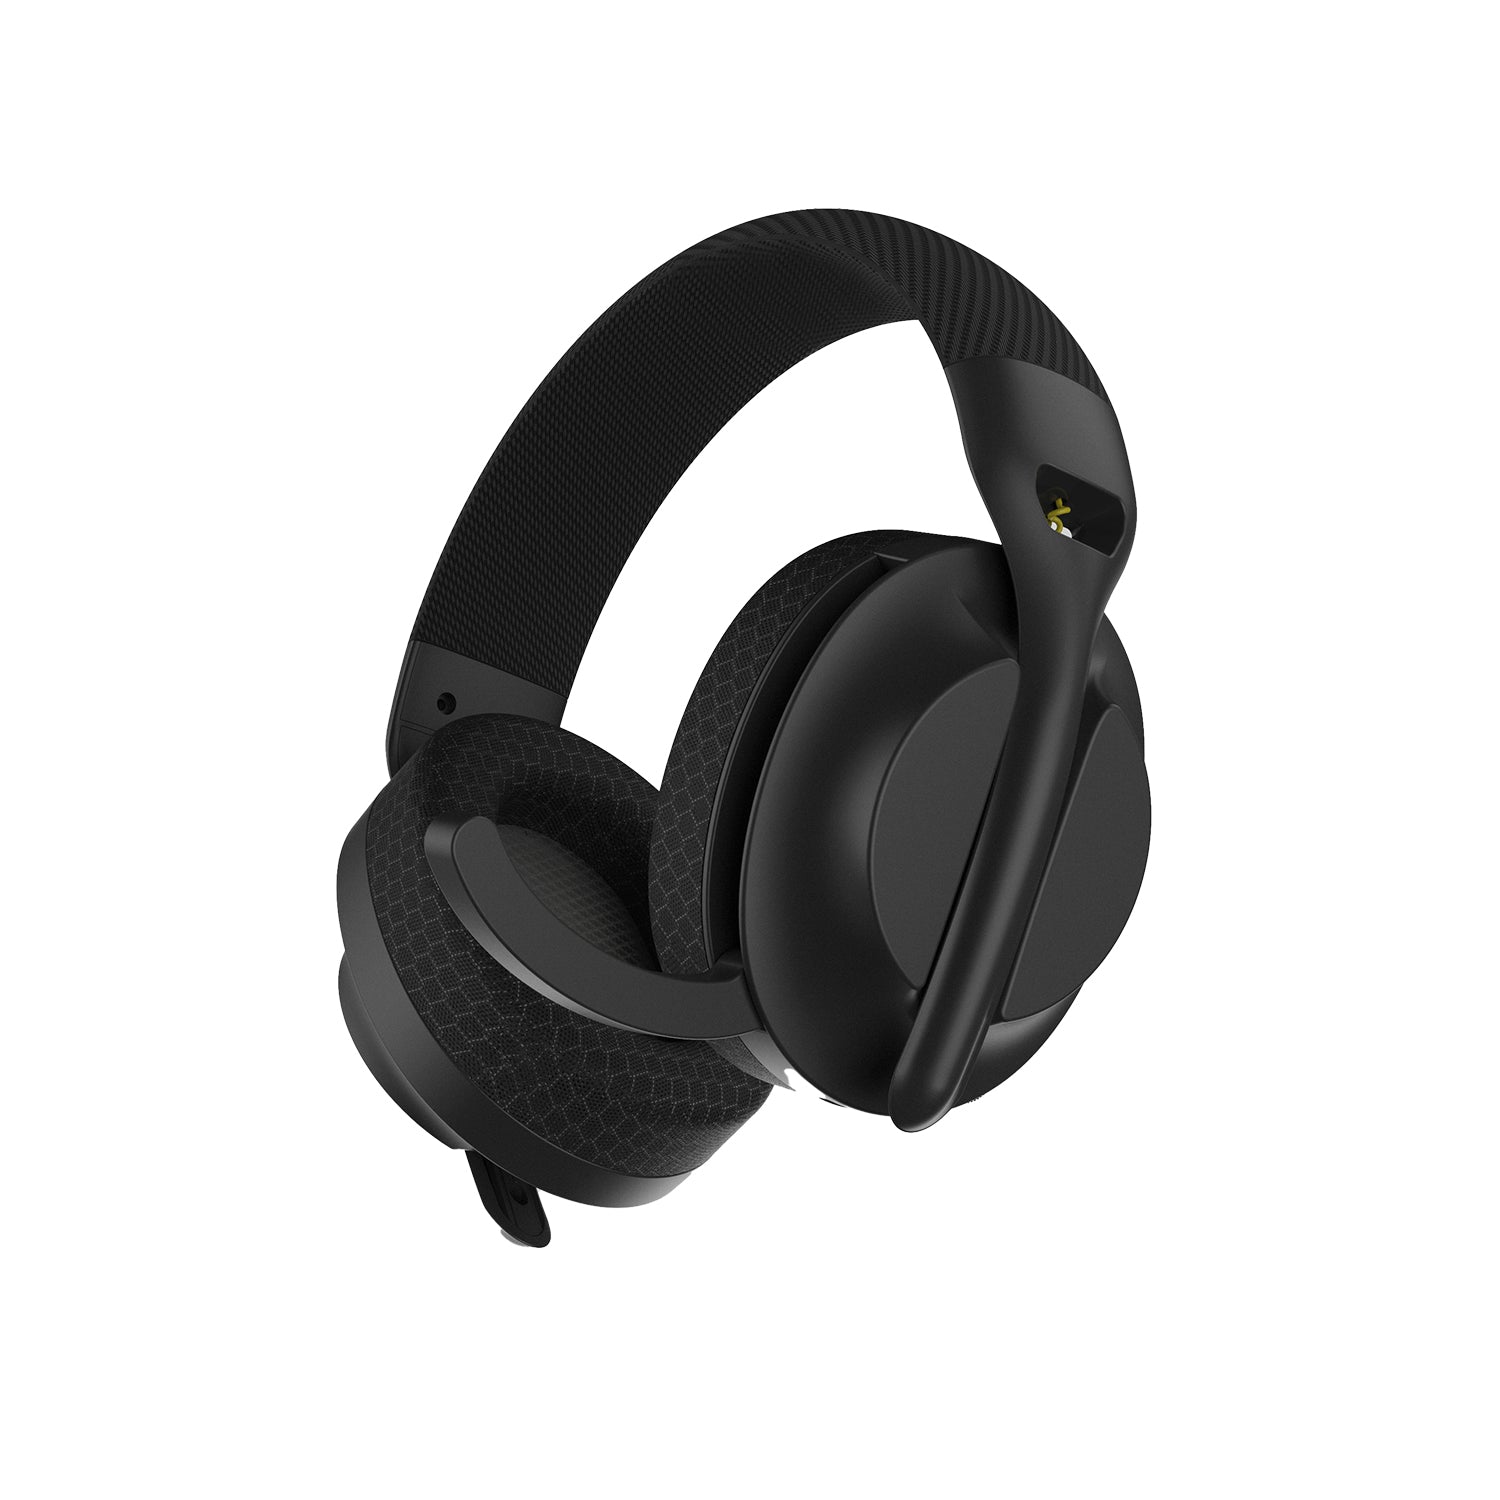 M360 Tri-Mode Gaming Headset In Black with Microphone Down Tilted Back View